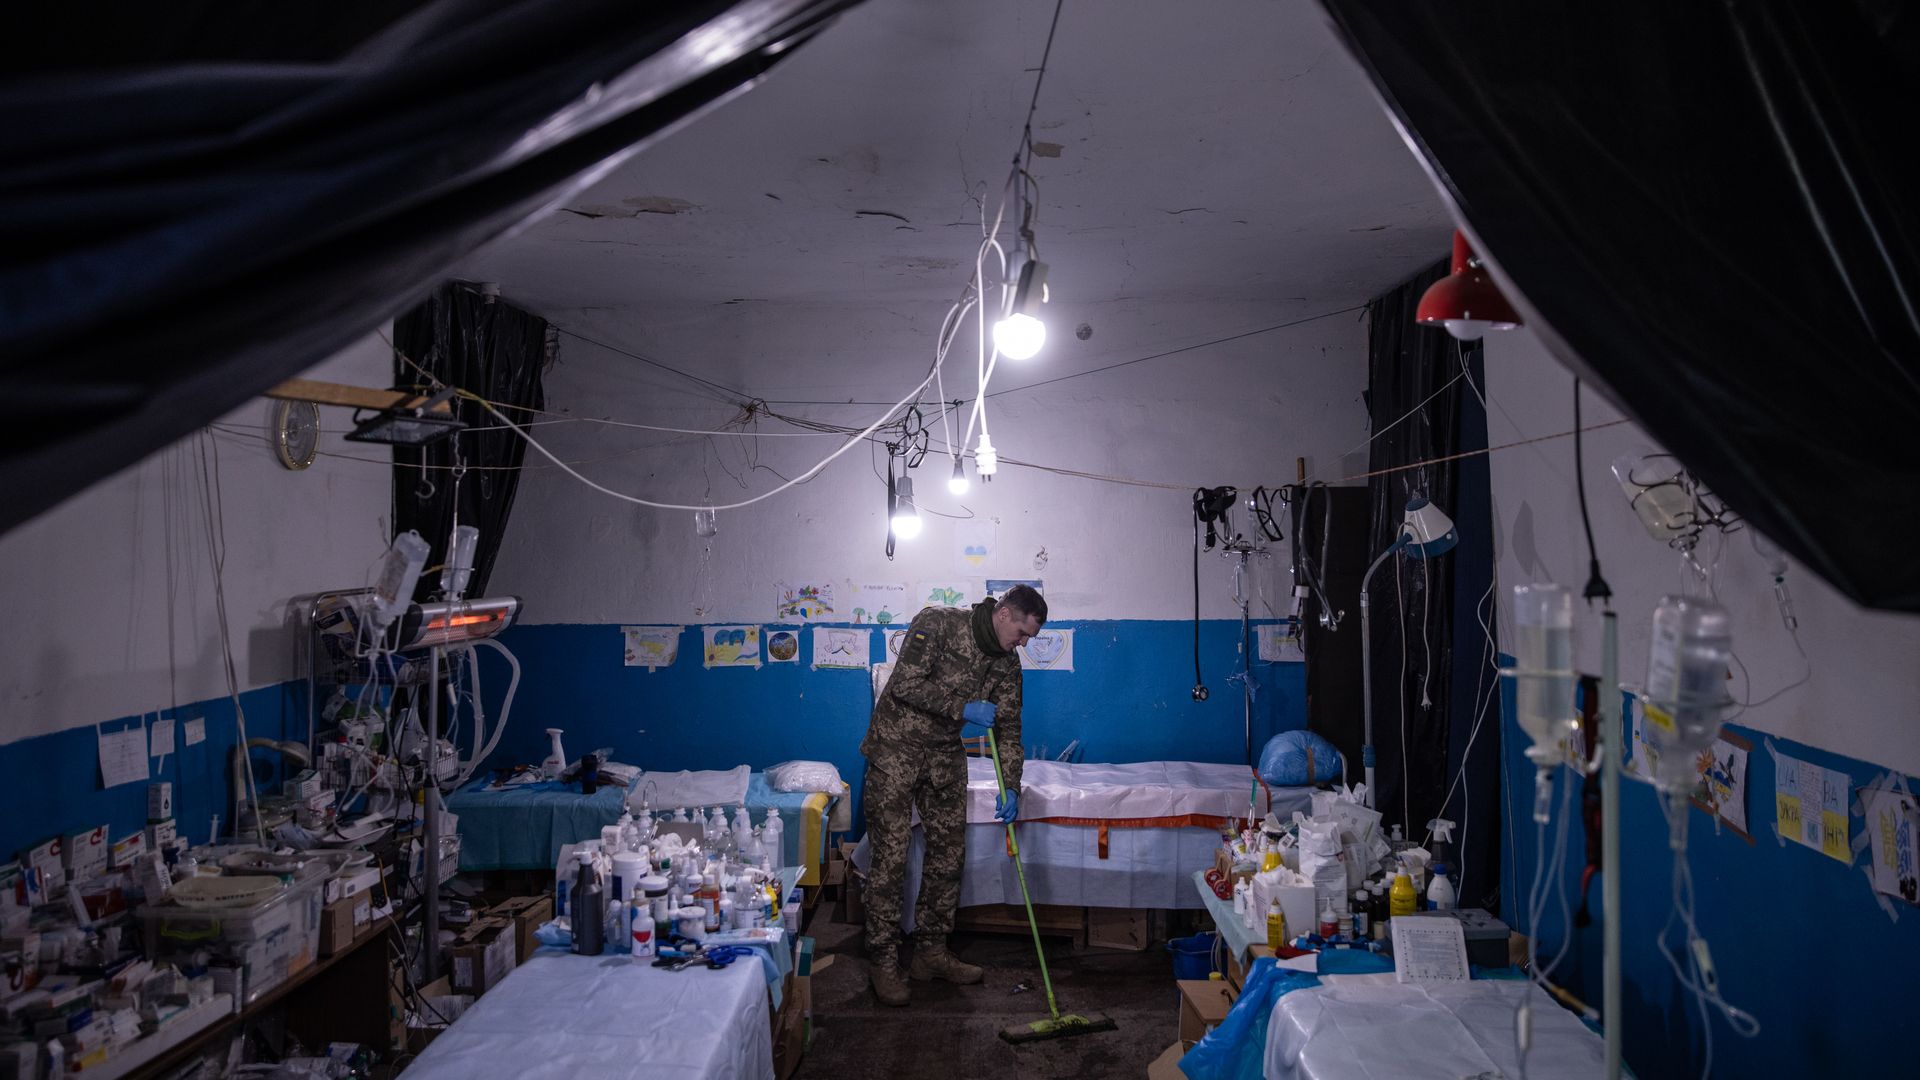 A Ukrainian military medic cleans the floor of the small operating room